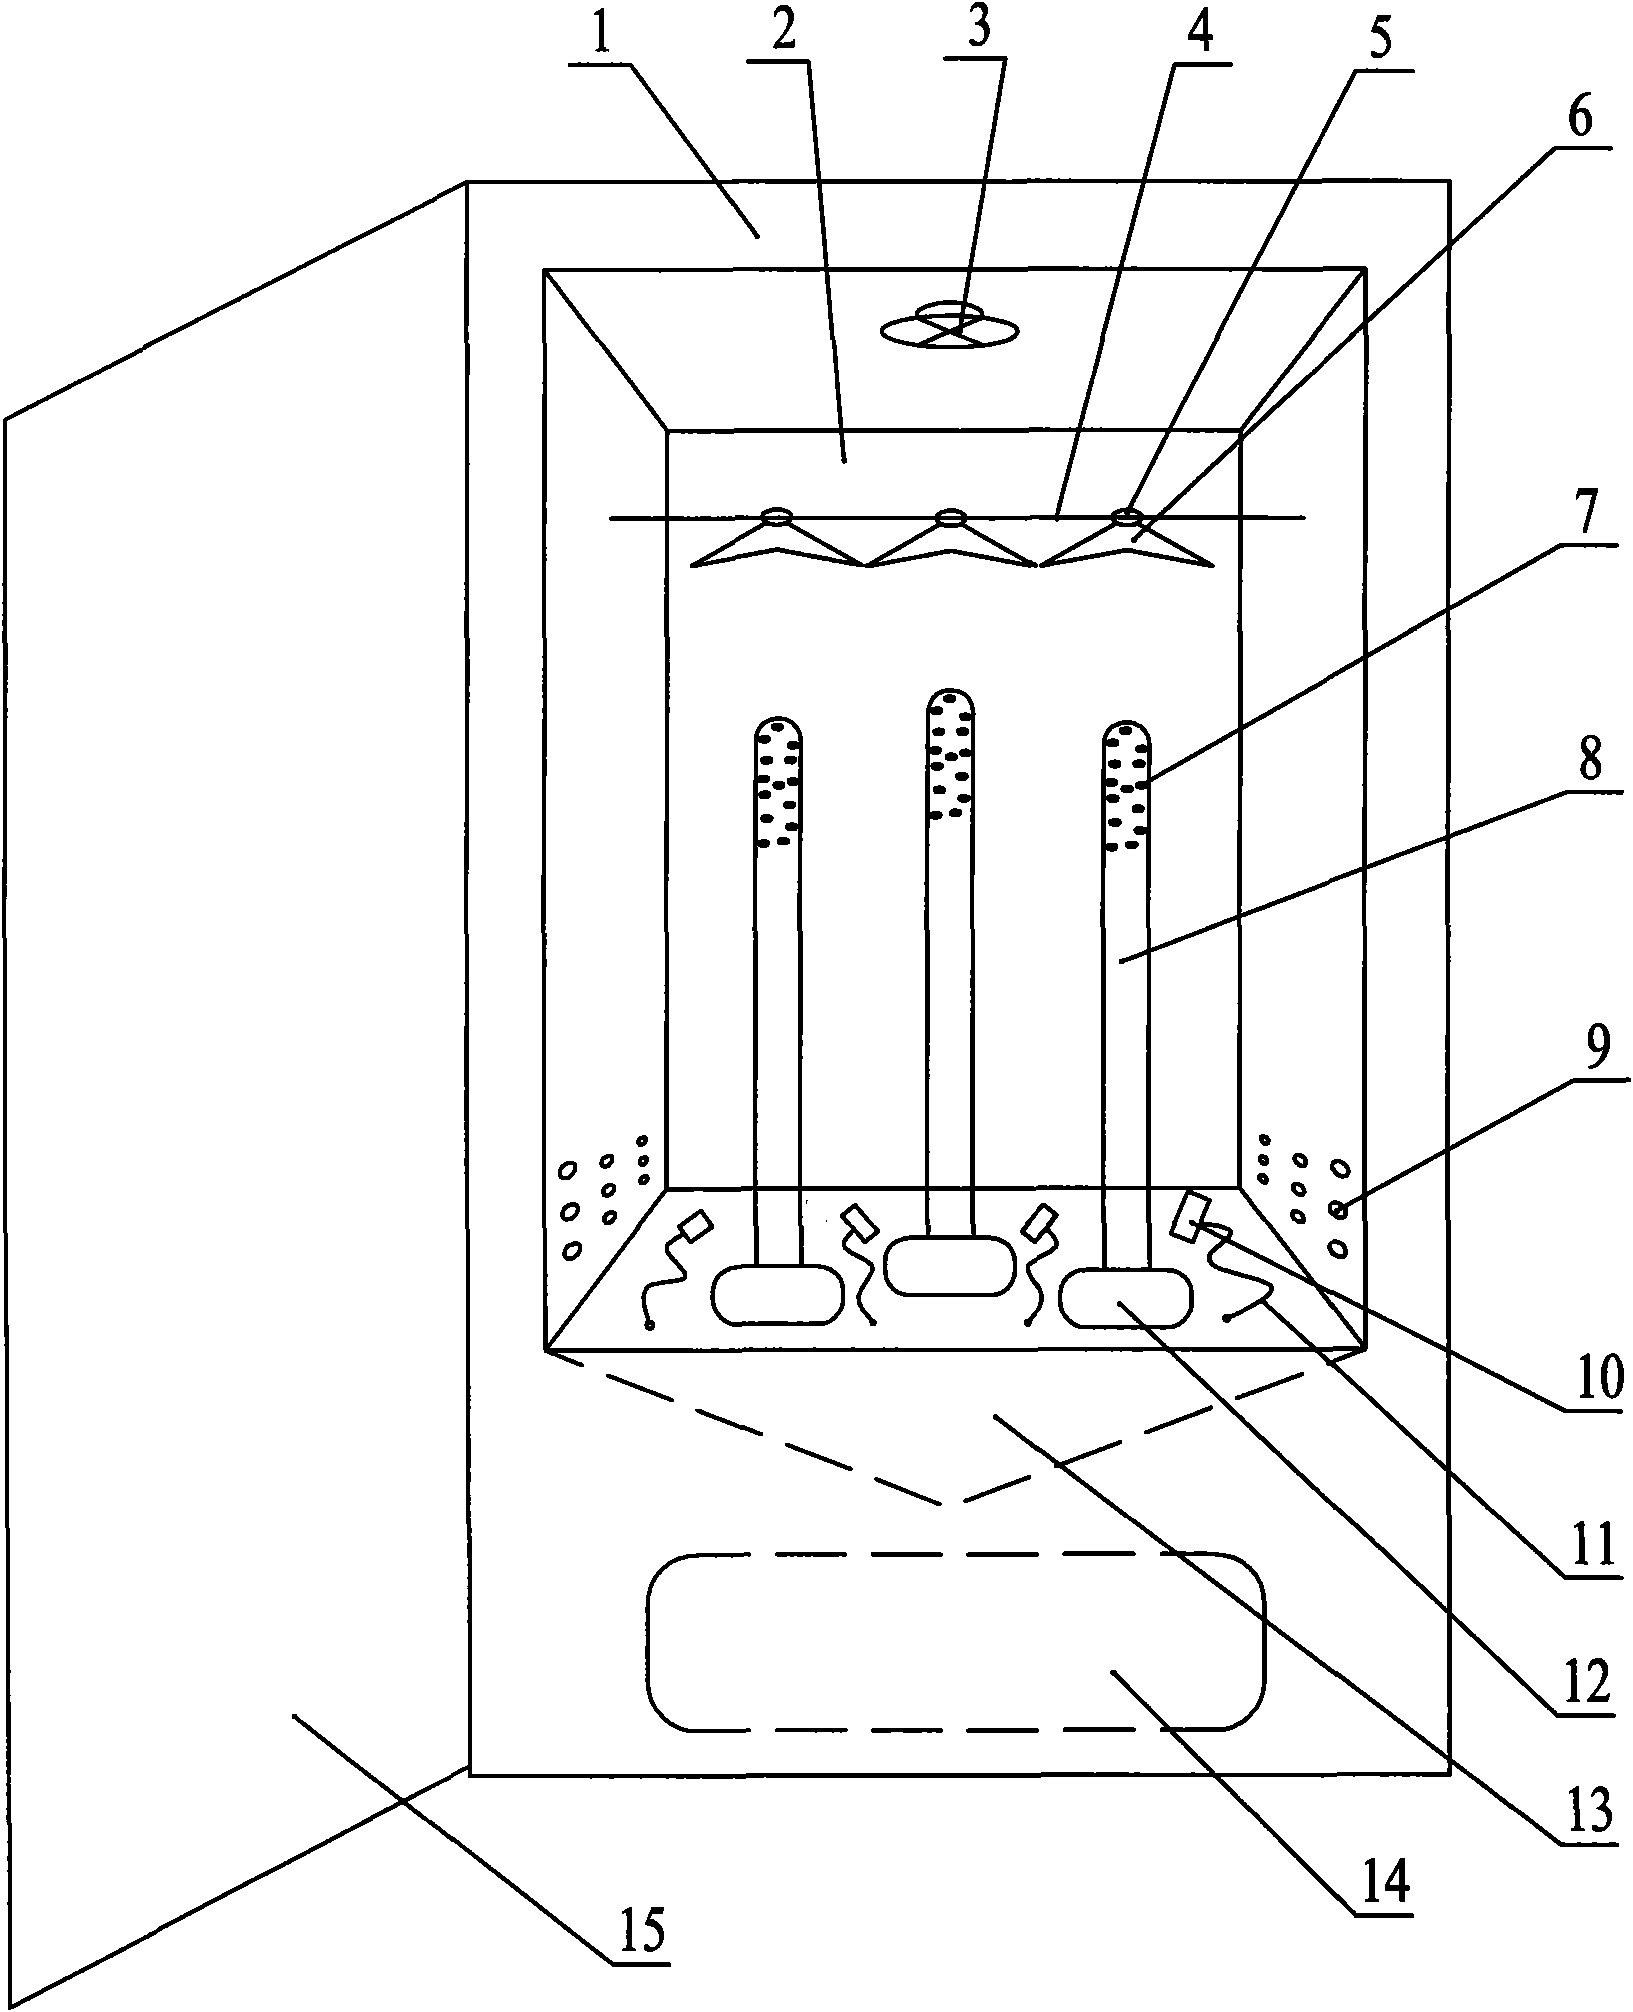 Steam washing machine with hanging-type clothes hanger